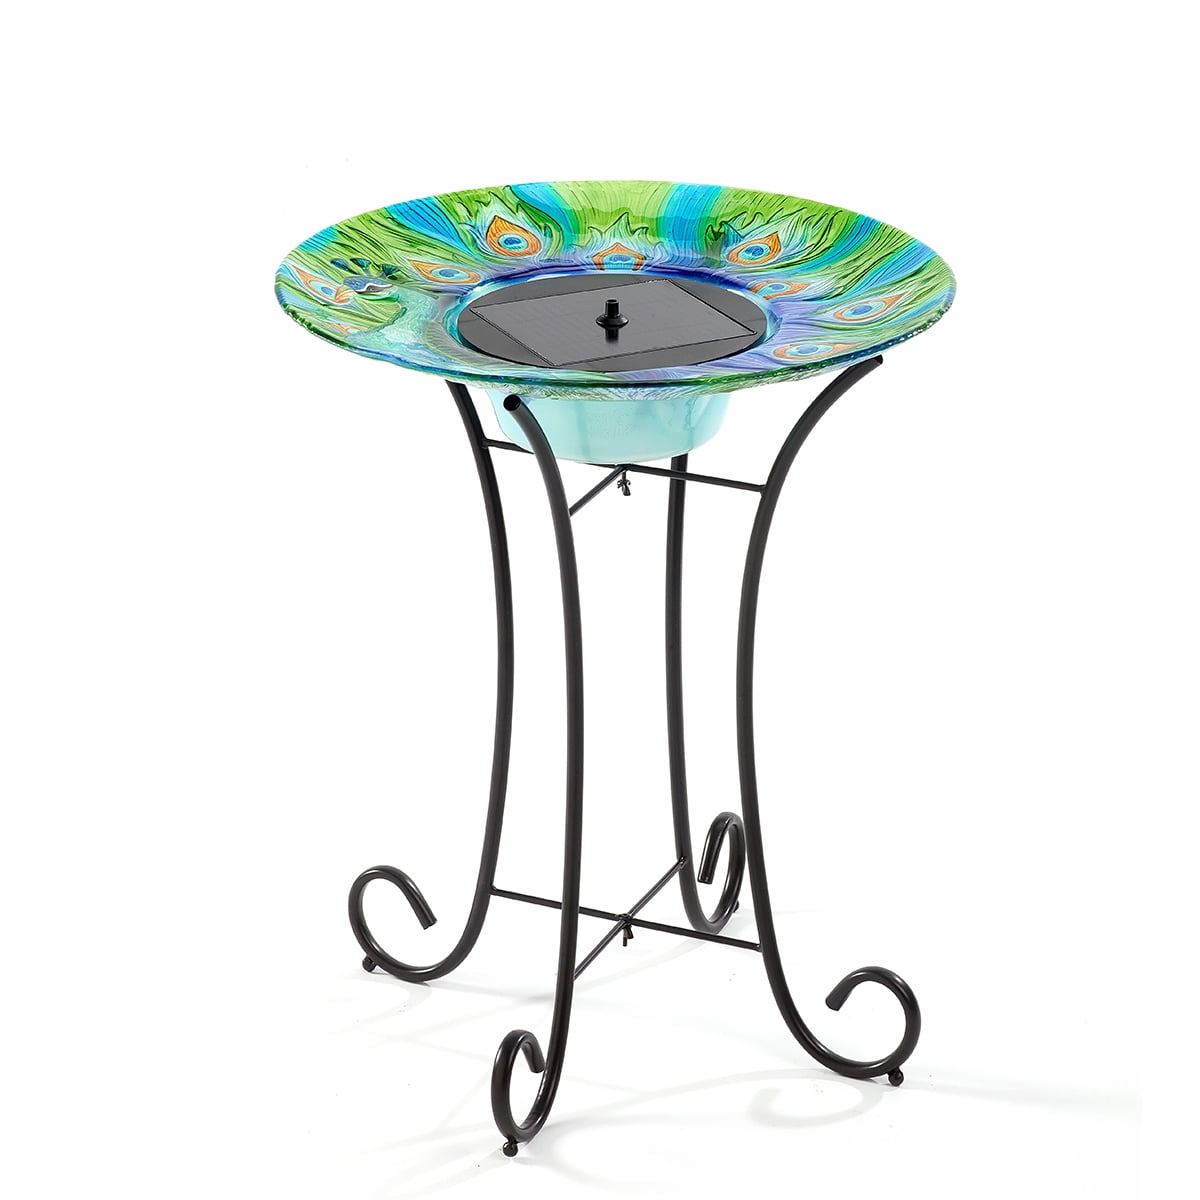 Kay Berry 31042 Forever Remembered Bird Bath 